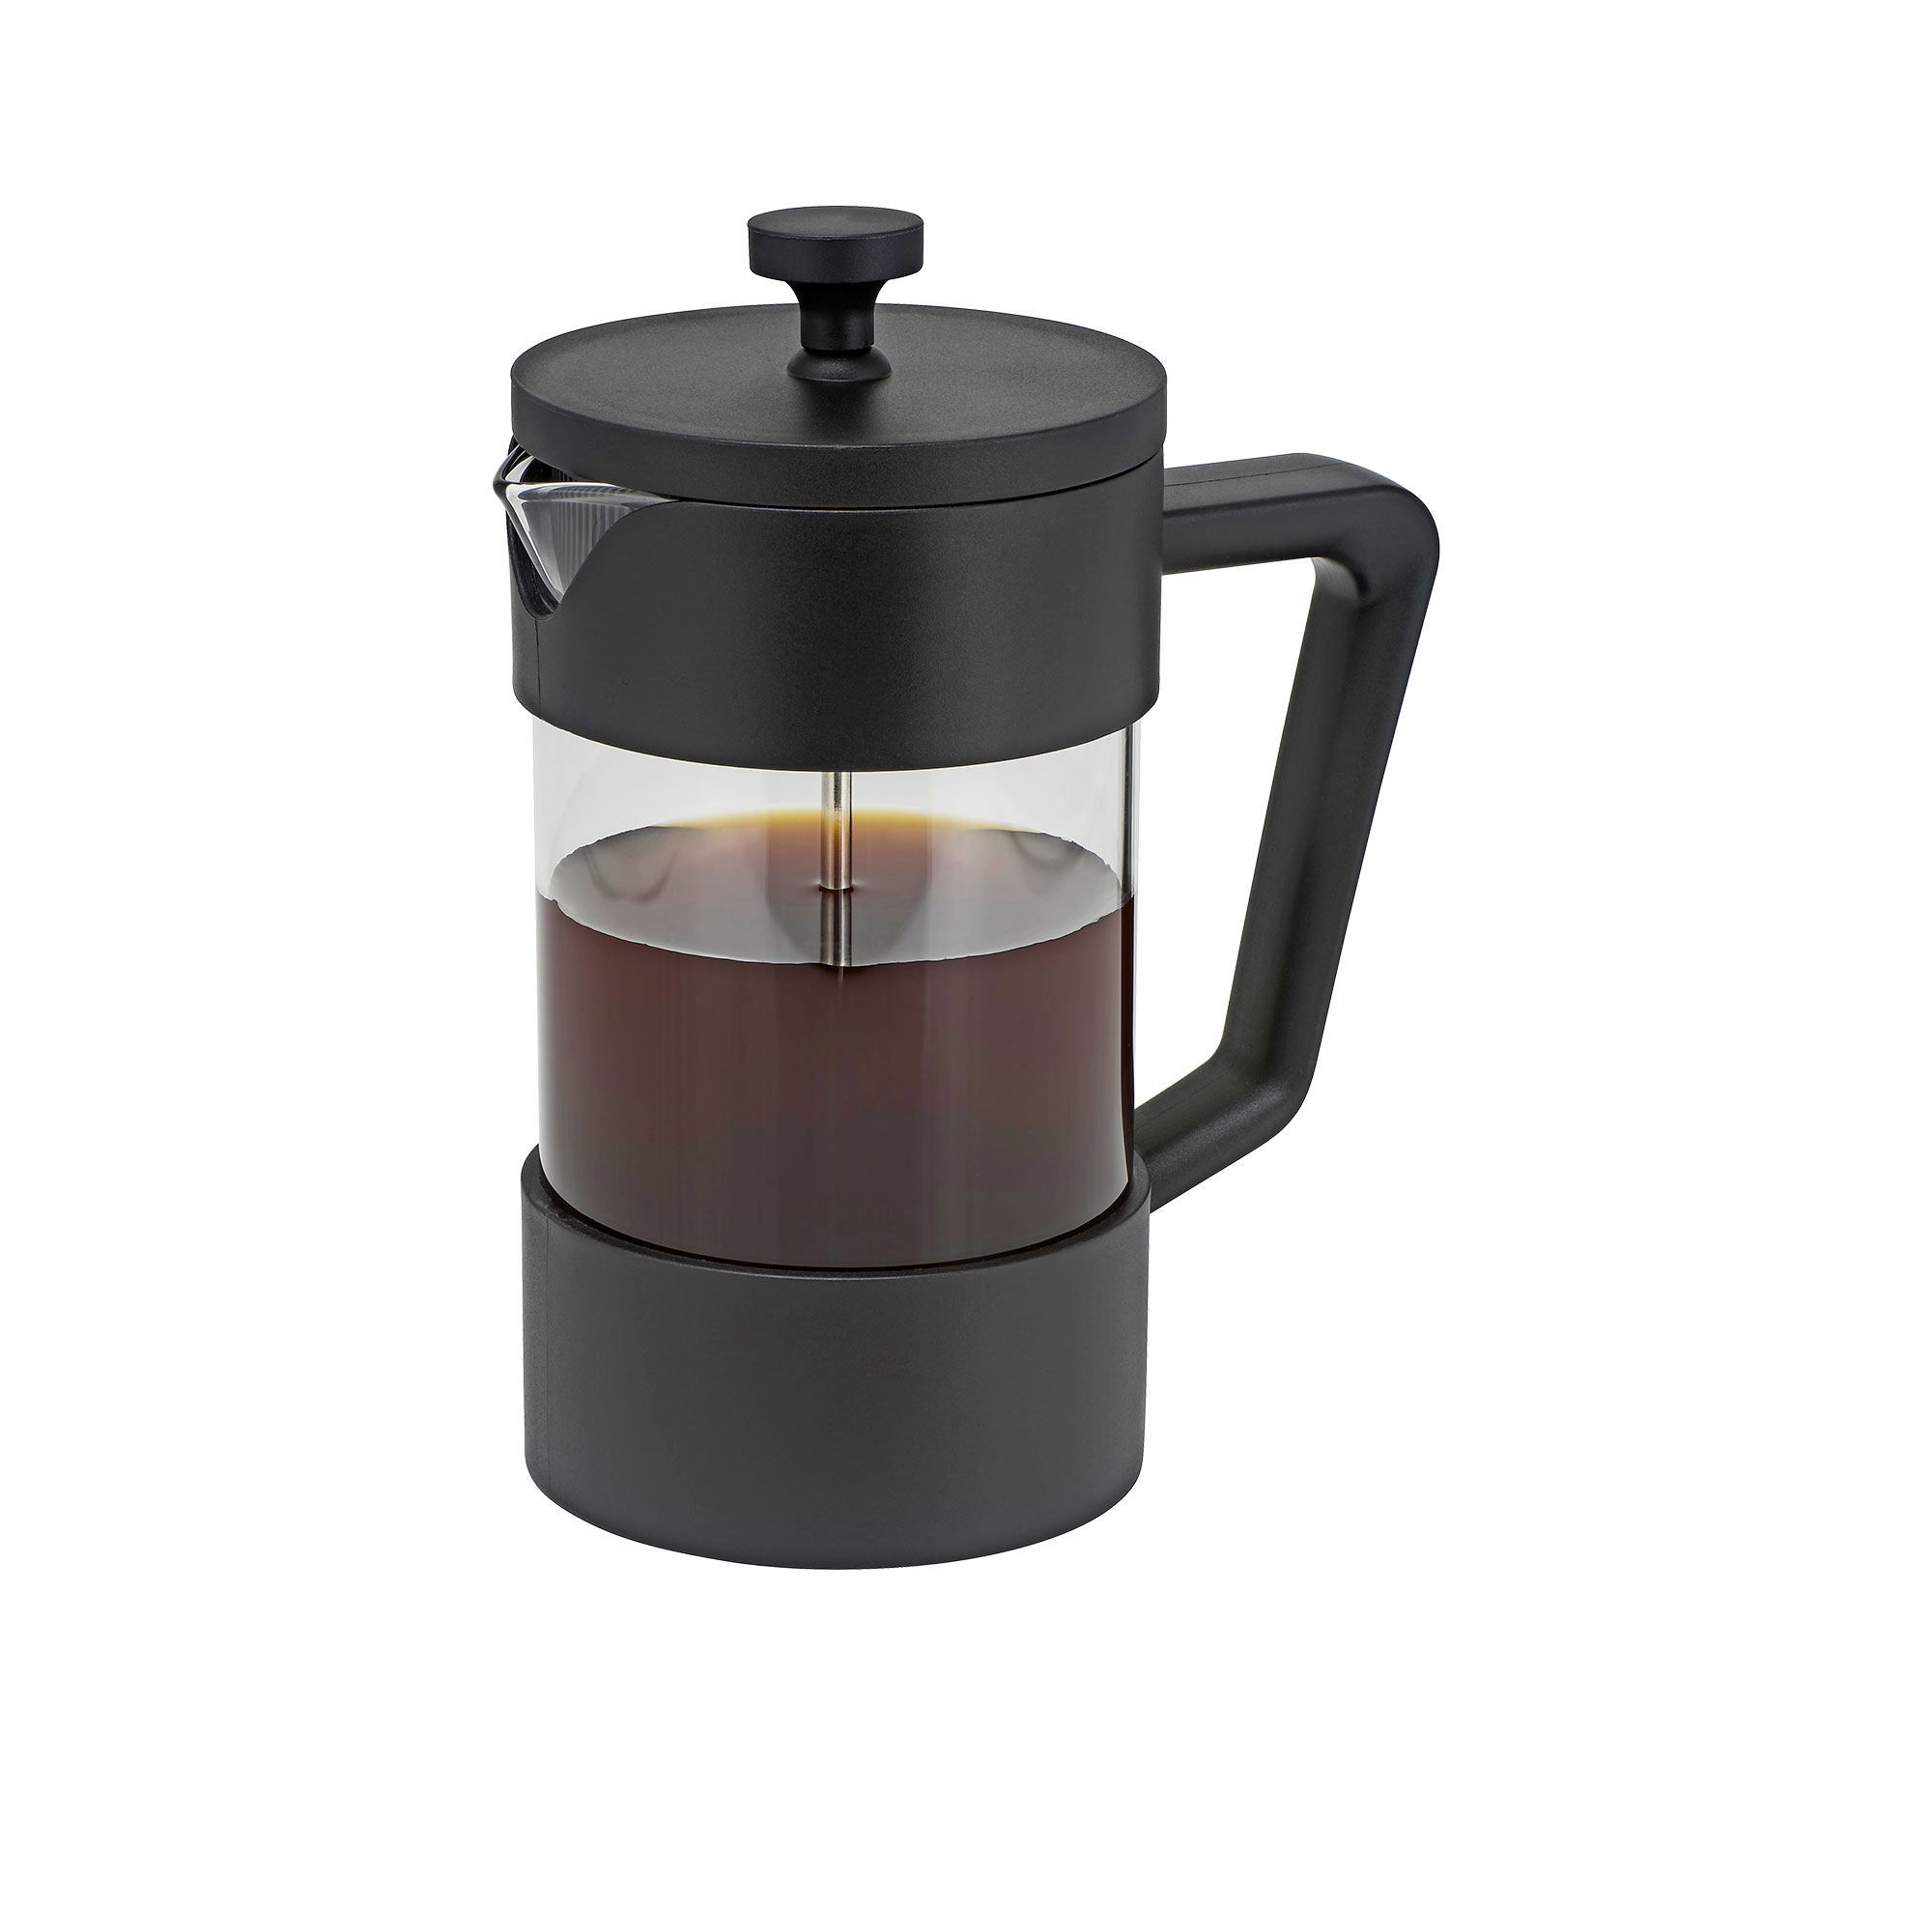 Avanti Sorrento Coffee Plunger 4 Cup Image 1